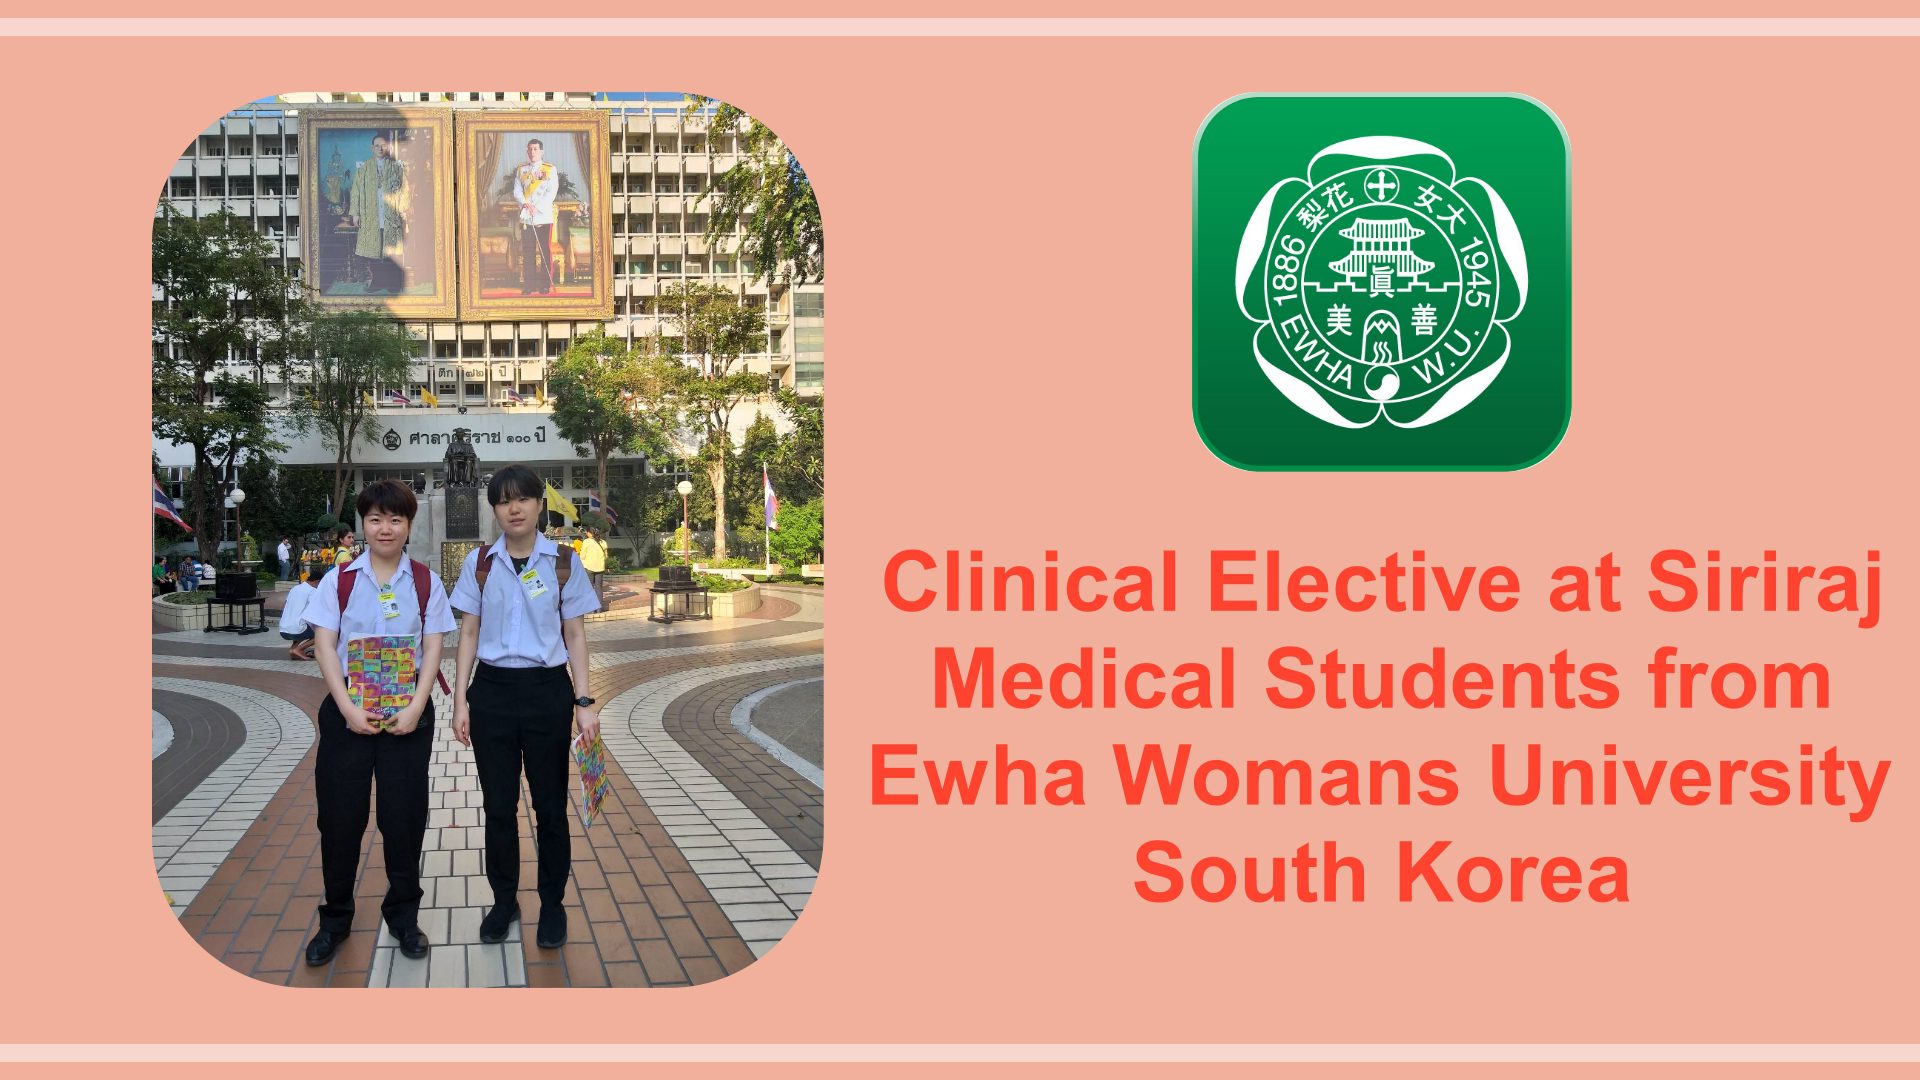 Clinical Elective for Medical Students from Ewha Womans University, South Korea